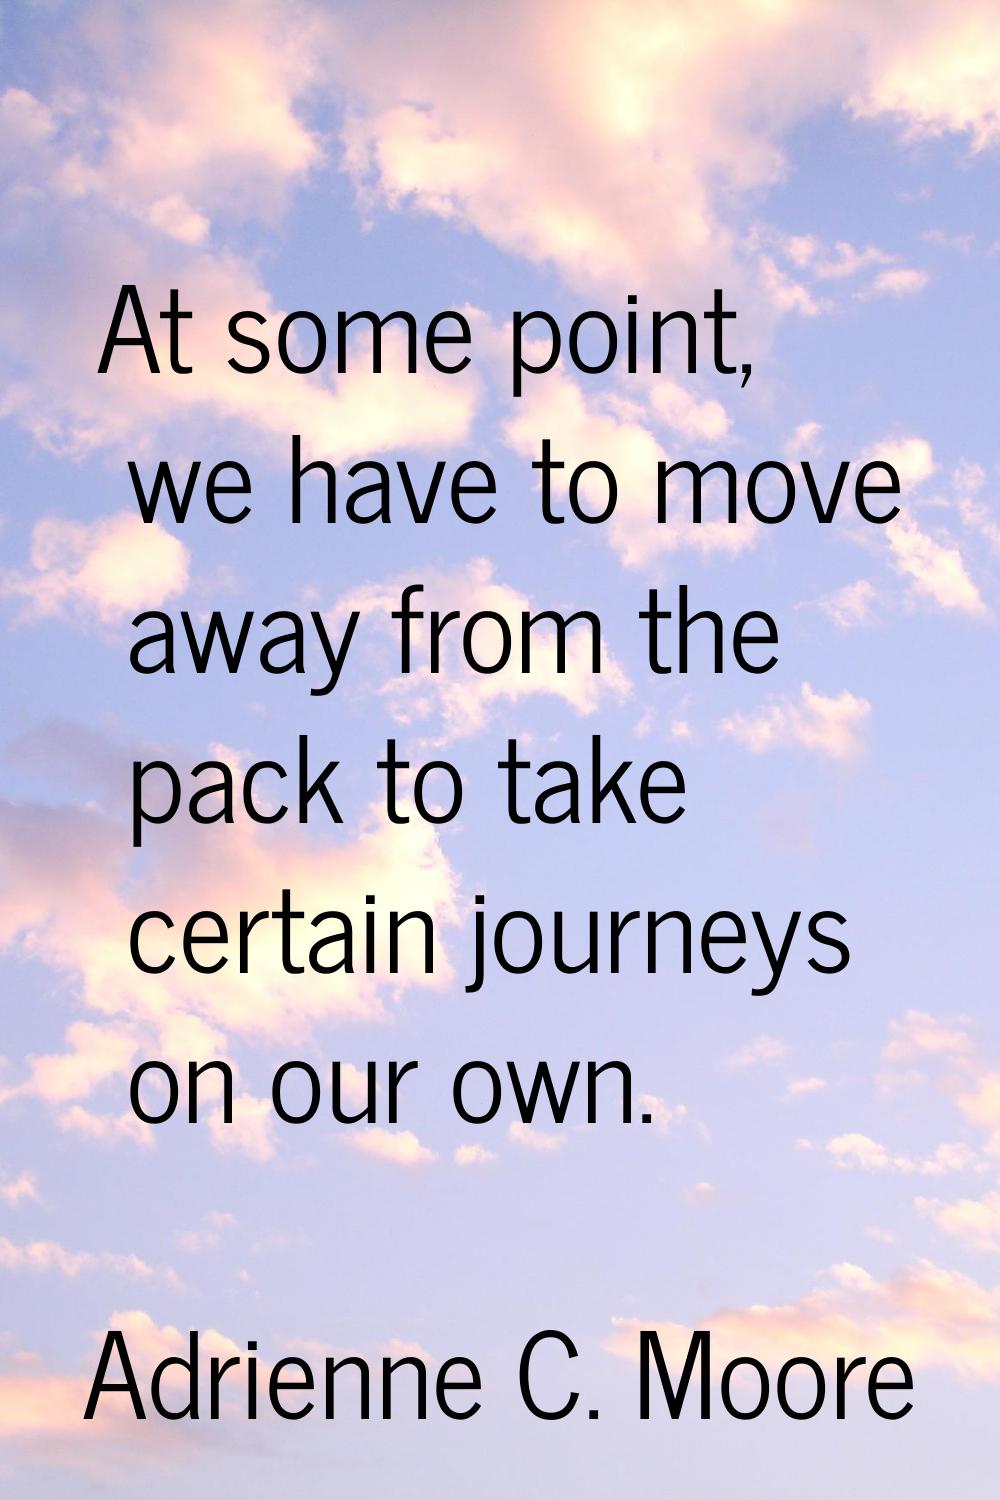 At some point, we have to move away from the pack to take certain journeys on our own.